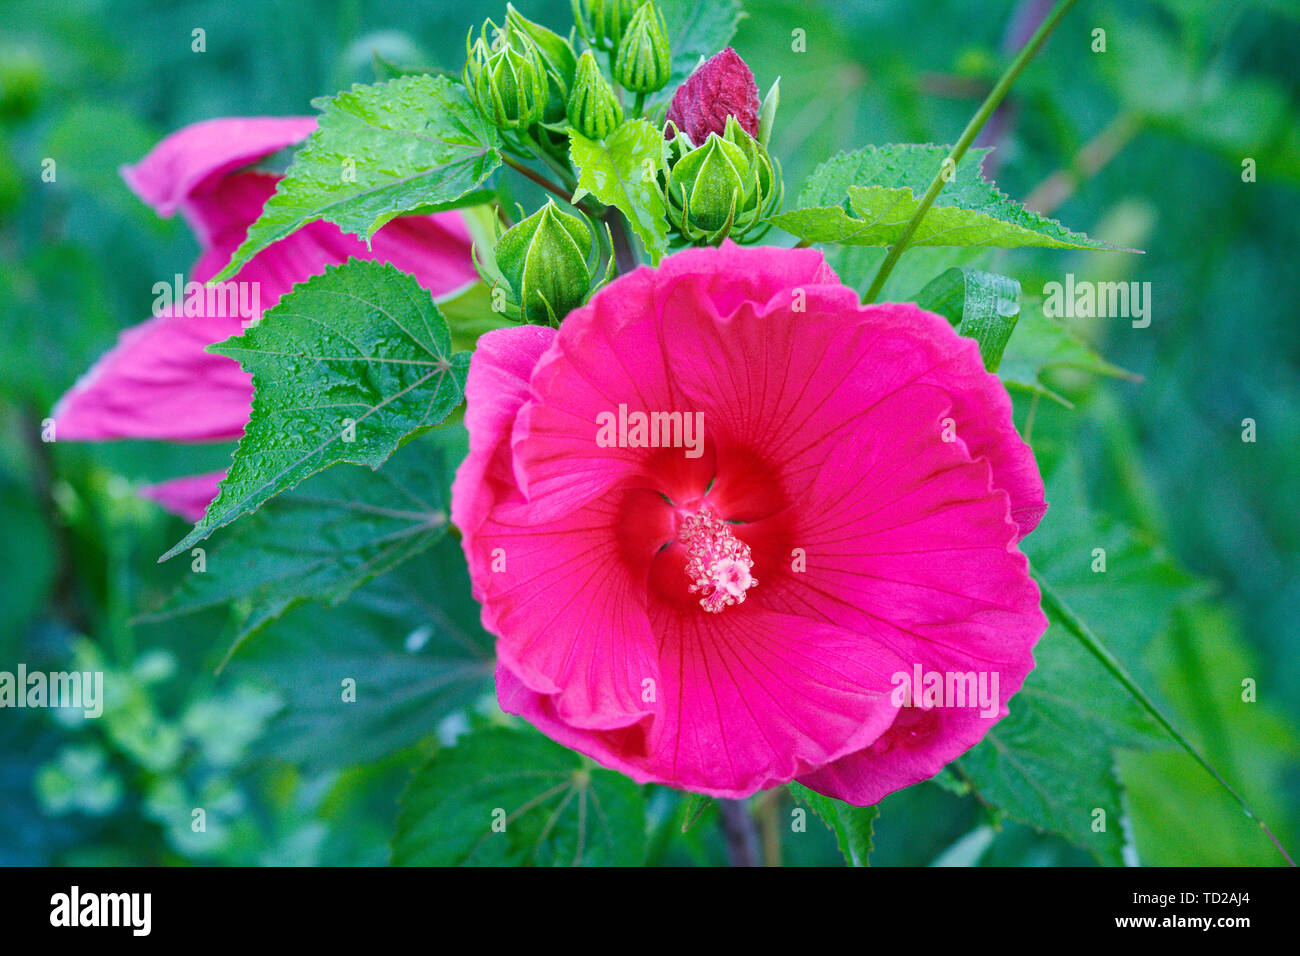 Bright pink hollyhock flower in the garden. Mallow flowers. Shallow depth of field. Selective focus. Stock Photo